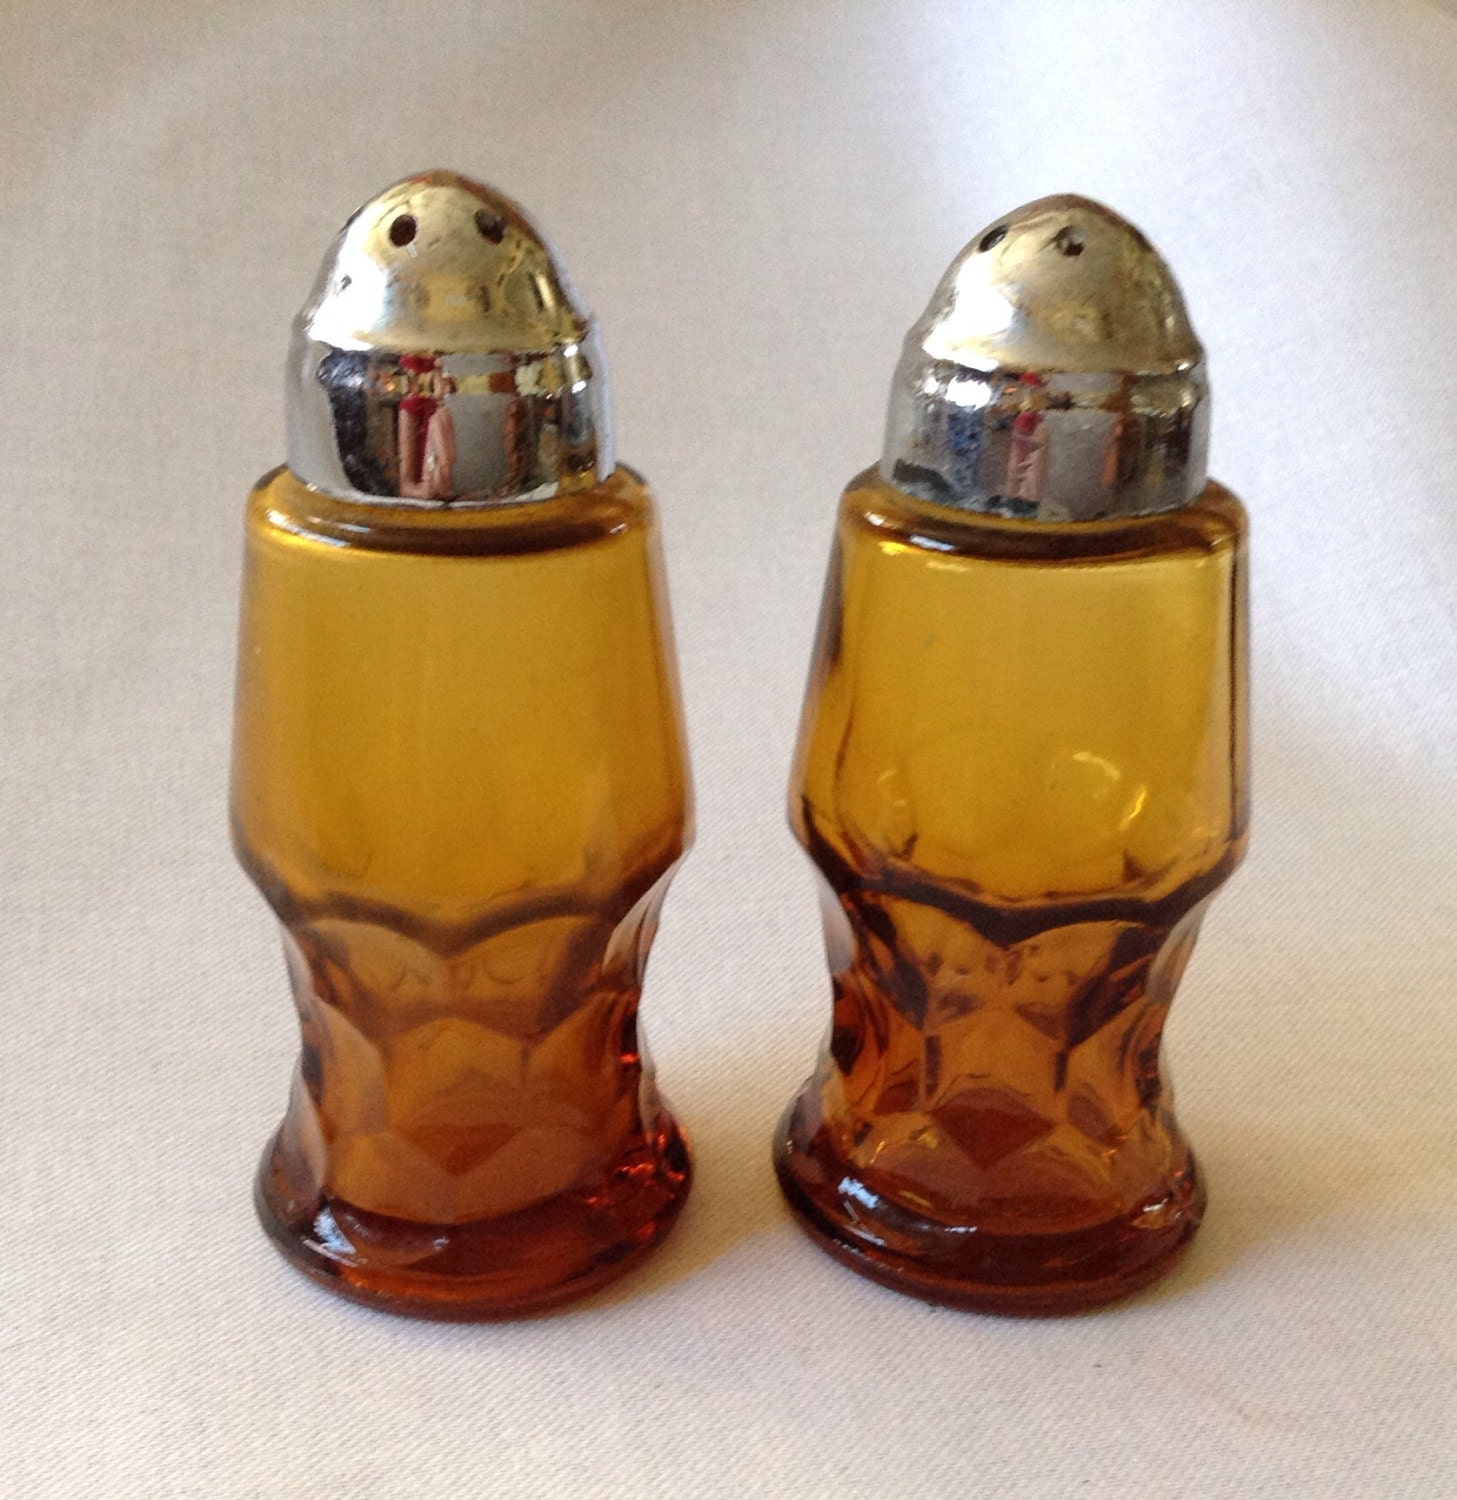 Vintage Salt And Pepper Shakers Worth Money - www.inf-inet.com